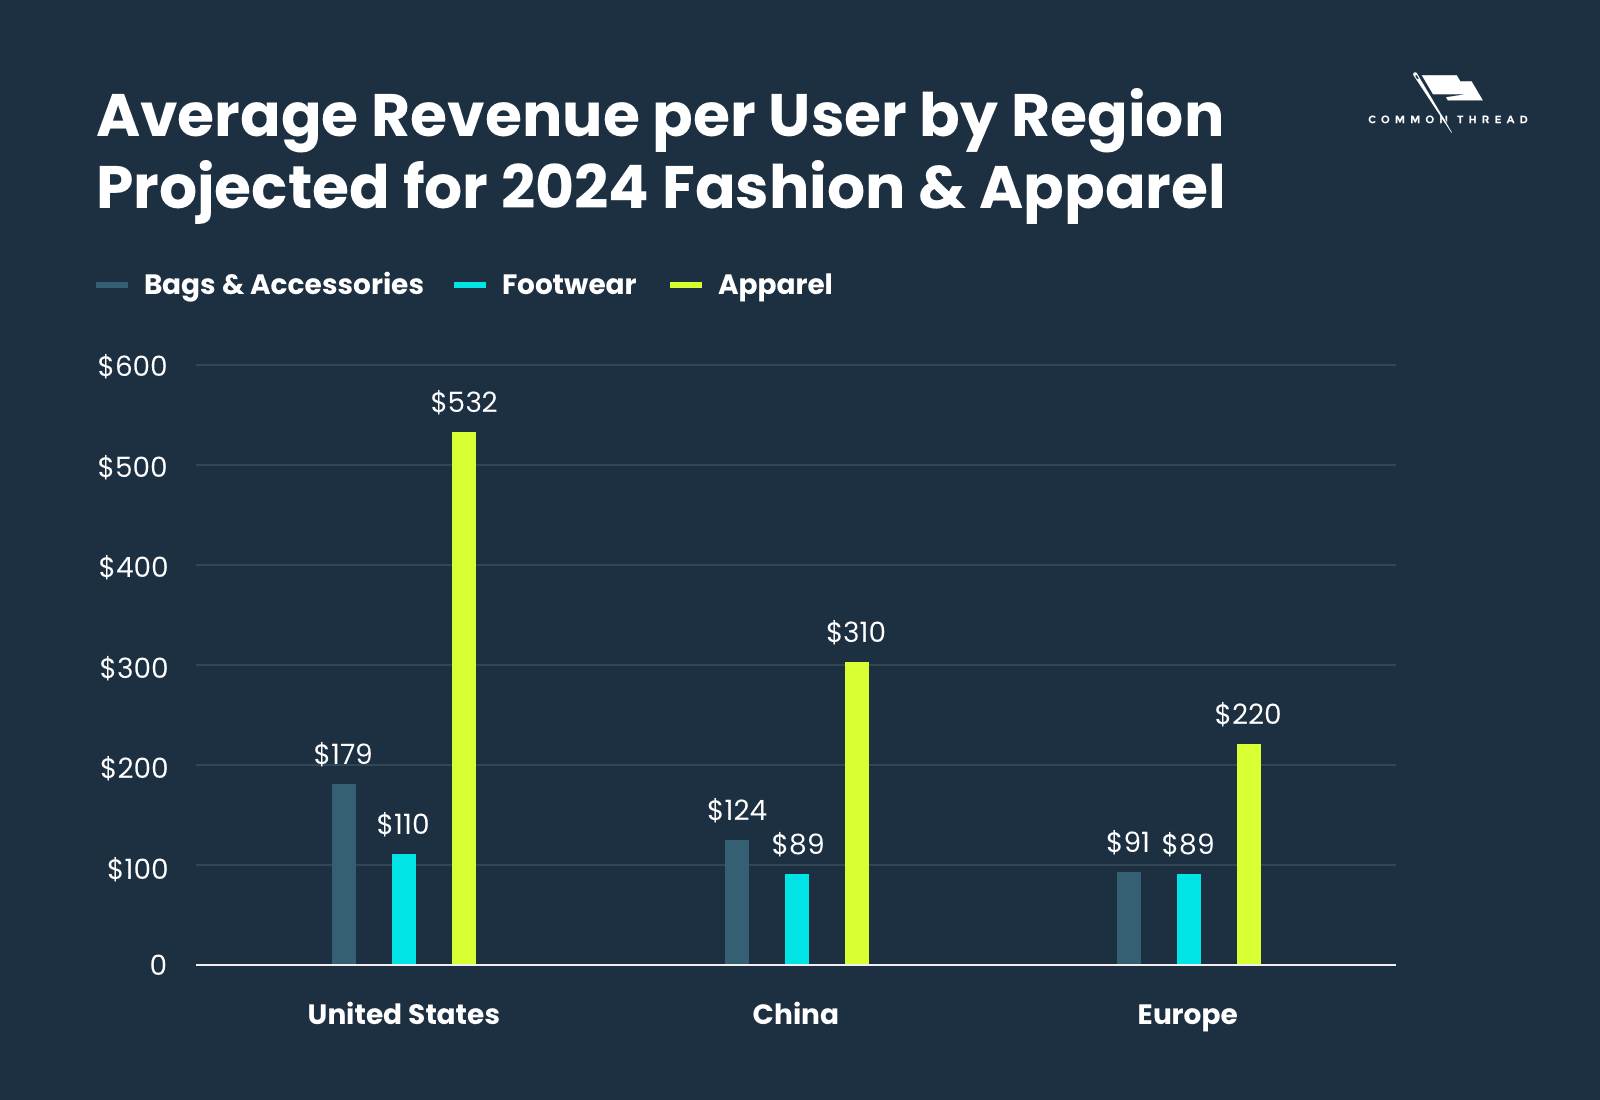 Average revenue per user by region projected for 2024 fasion and apparel